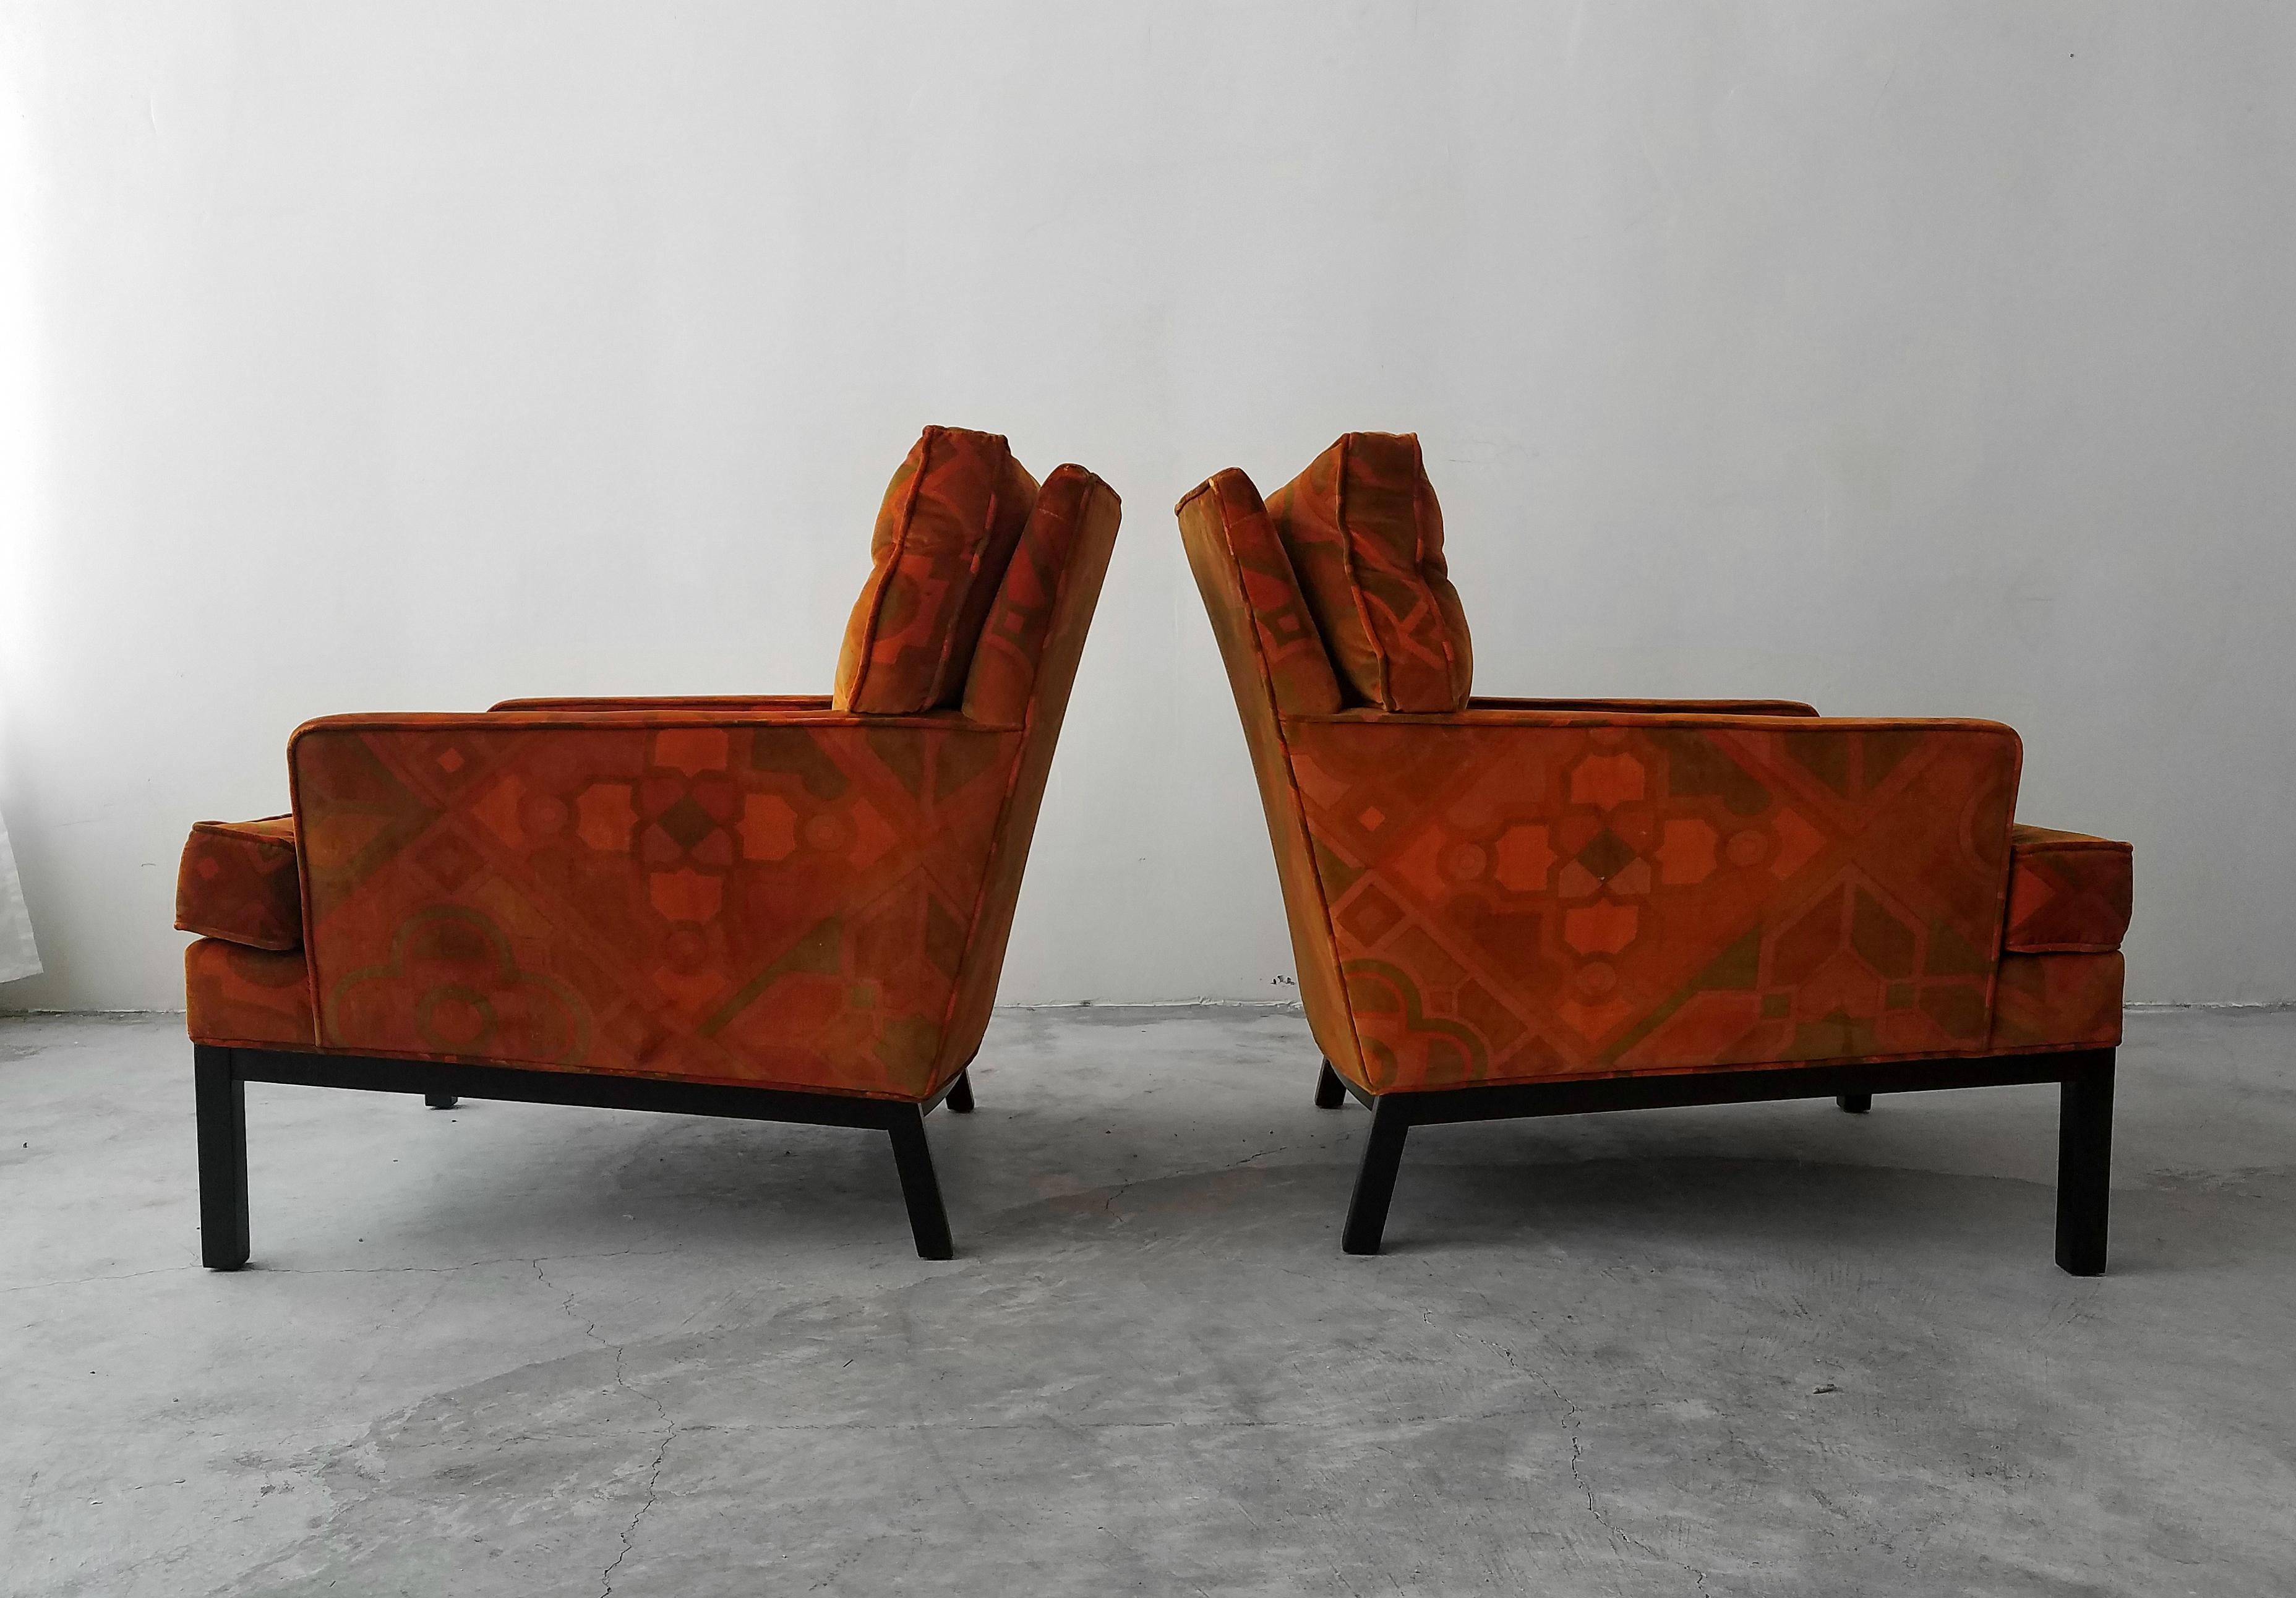 20th Century Pair of Midcentury Lounge Chairs by Harvey Probber in Jack Lenor Larsen Fabric